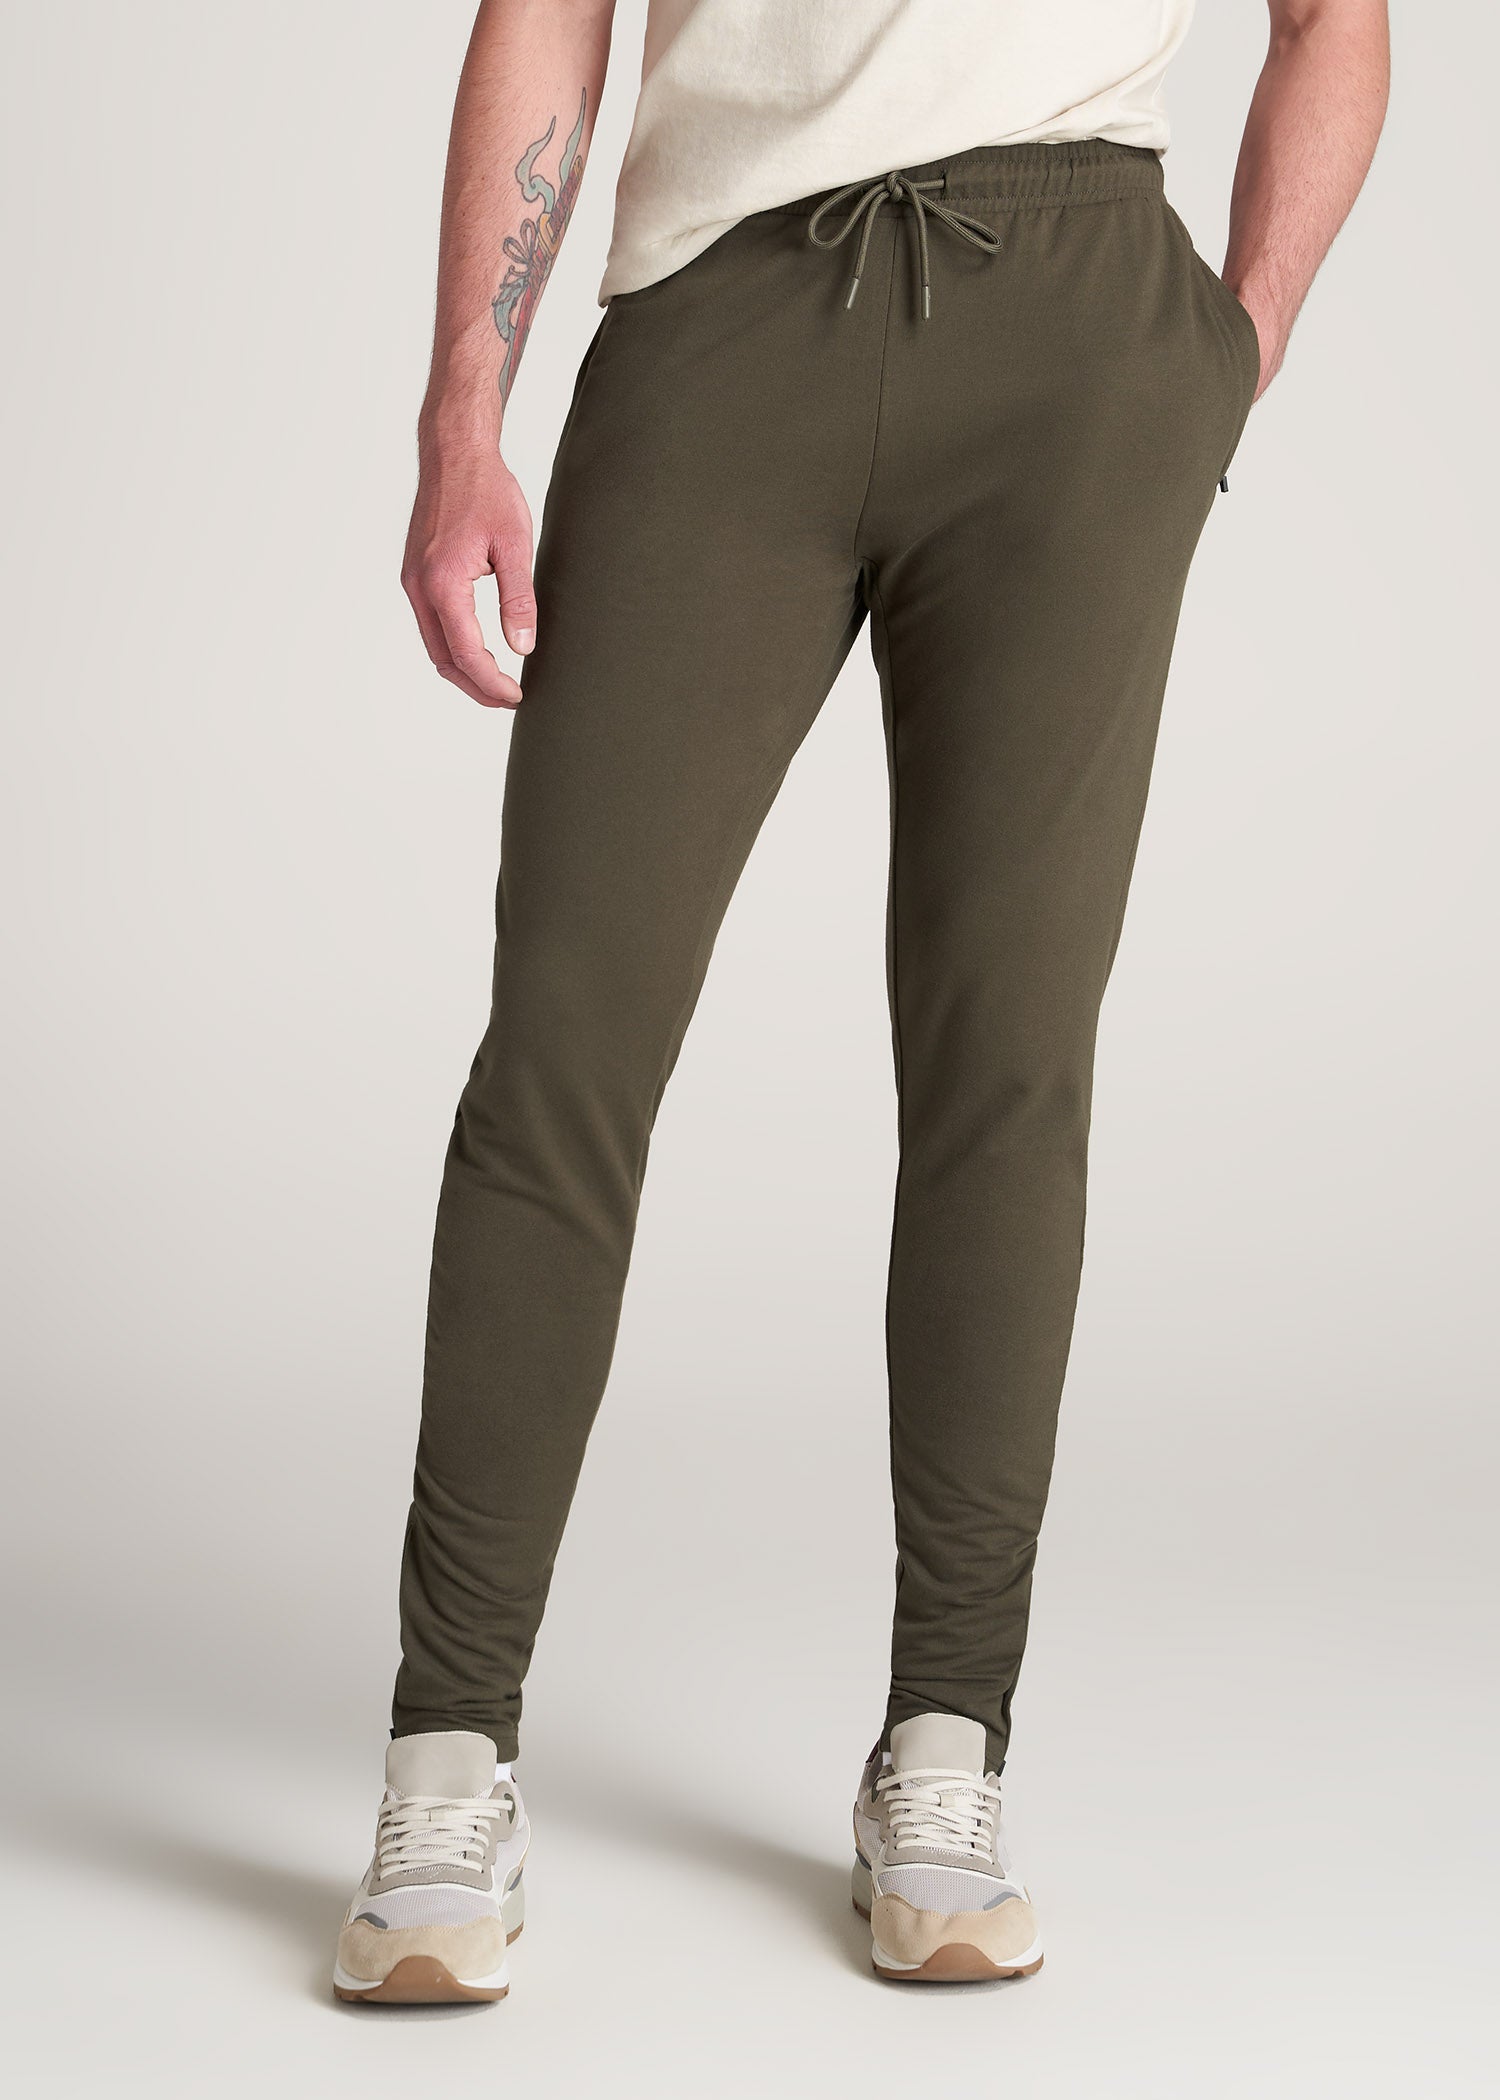 SLIM-FIT Lightweight French Terry Joggers for Tall Men in Camo Green